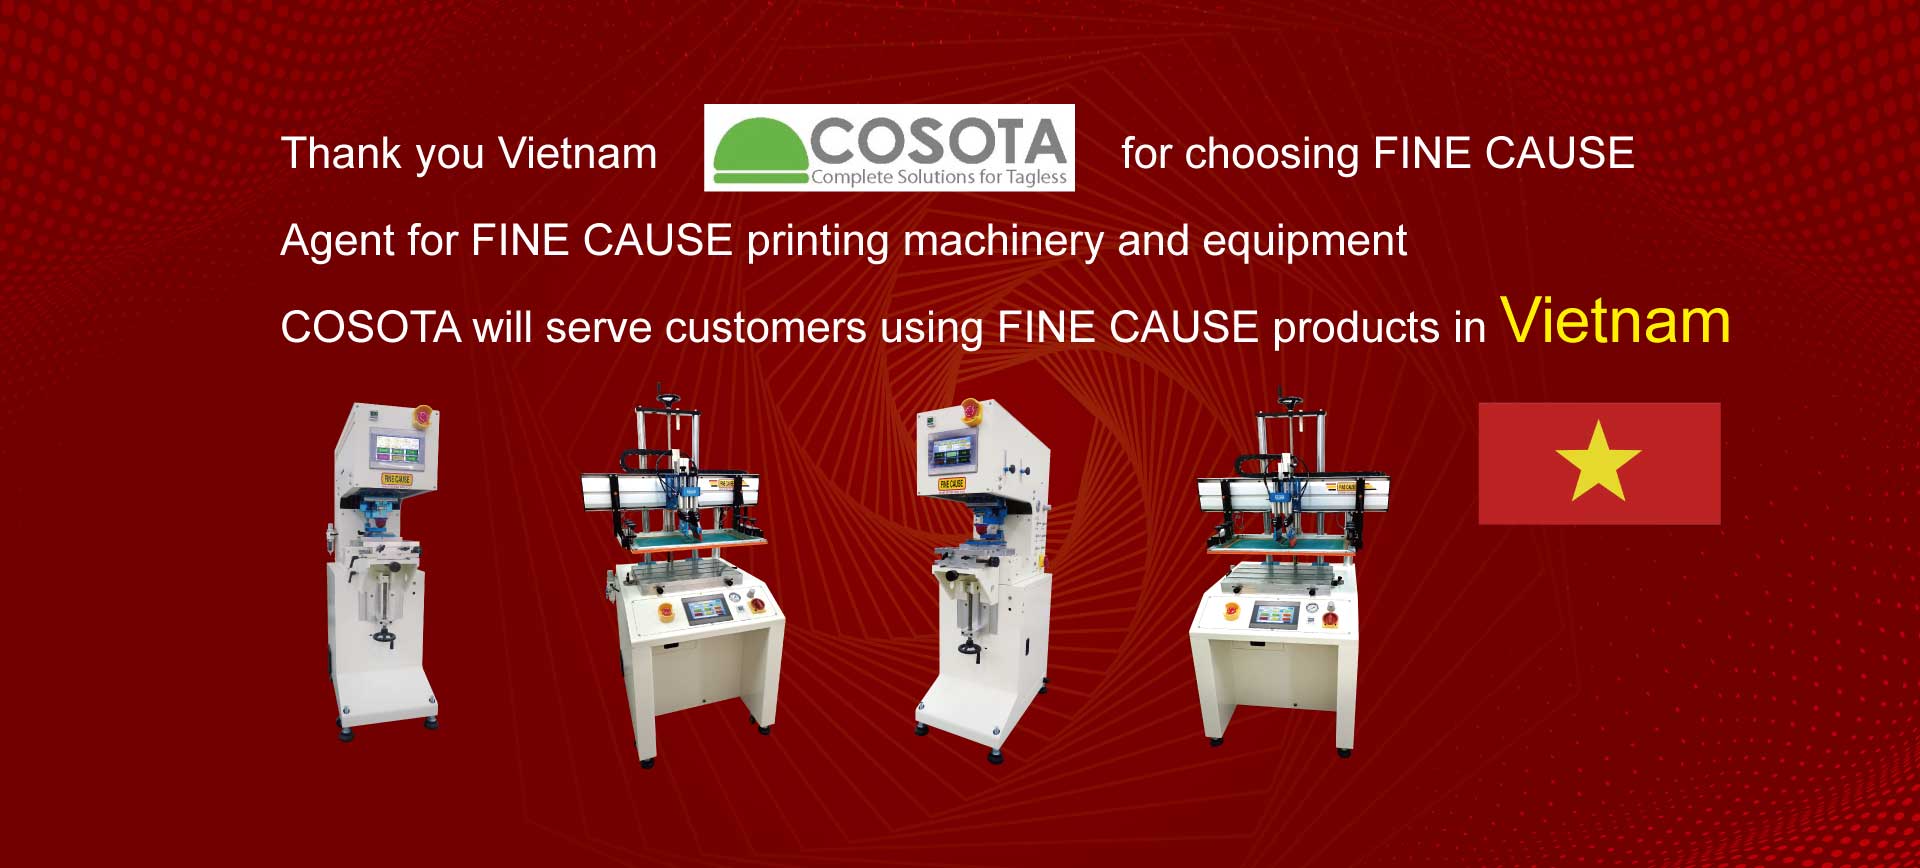 FINECAUSE is represented by COSOTA in Vietnam.